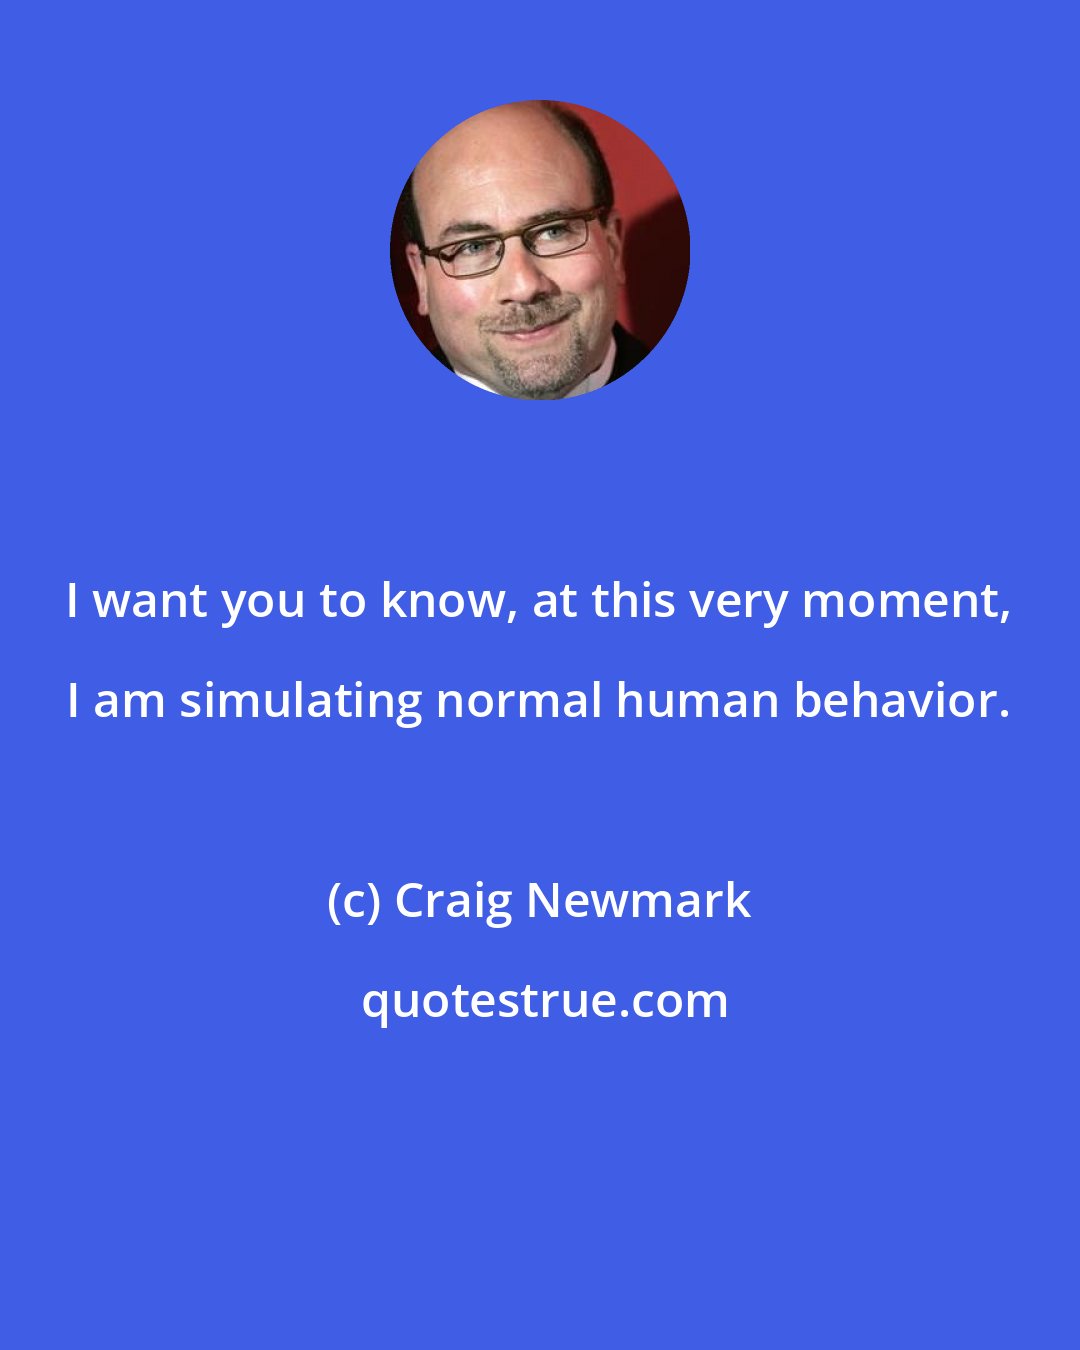 Craig Newmark: I want you to know, at this very moment, I am simulating normal human behavior.